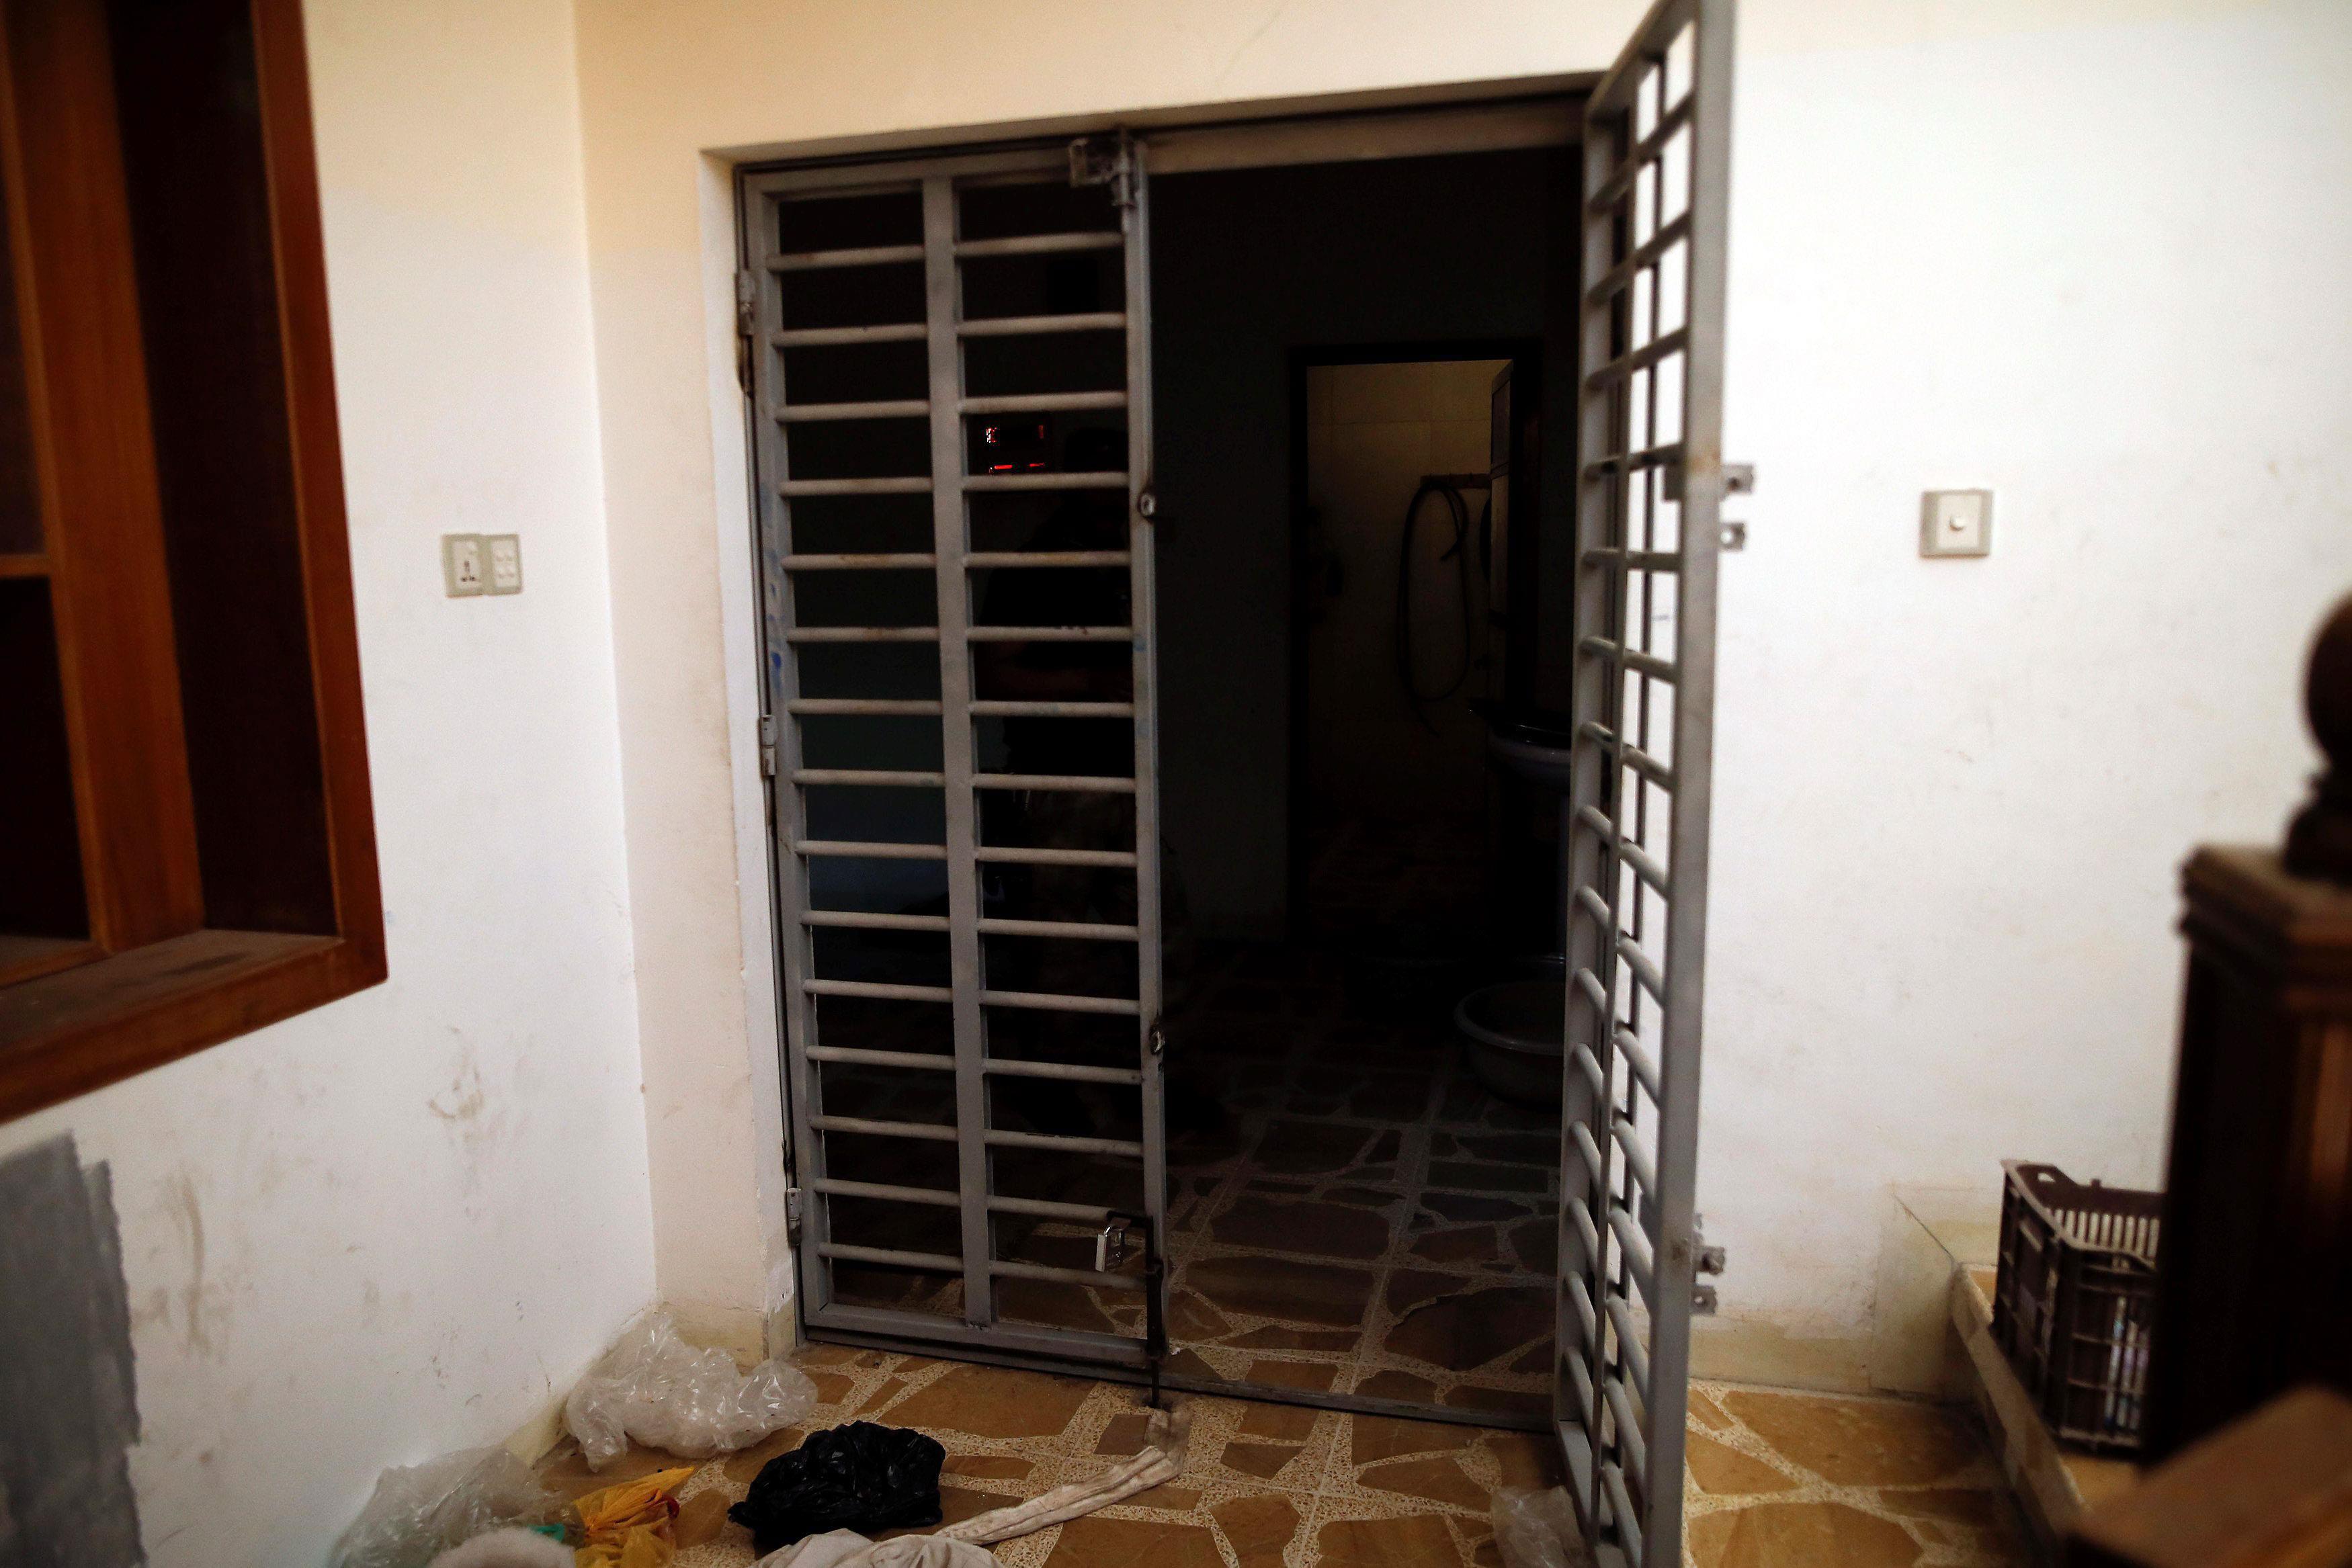 The Wider Image: Inside an Islamic State prison